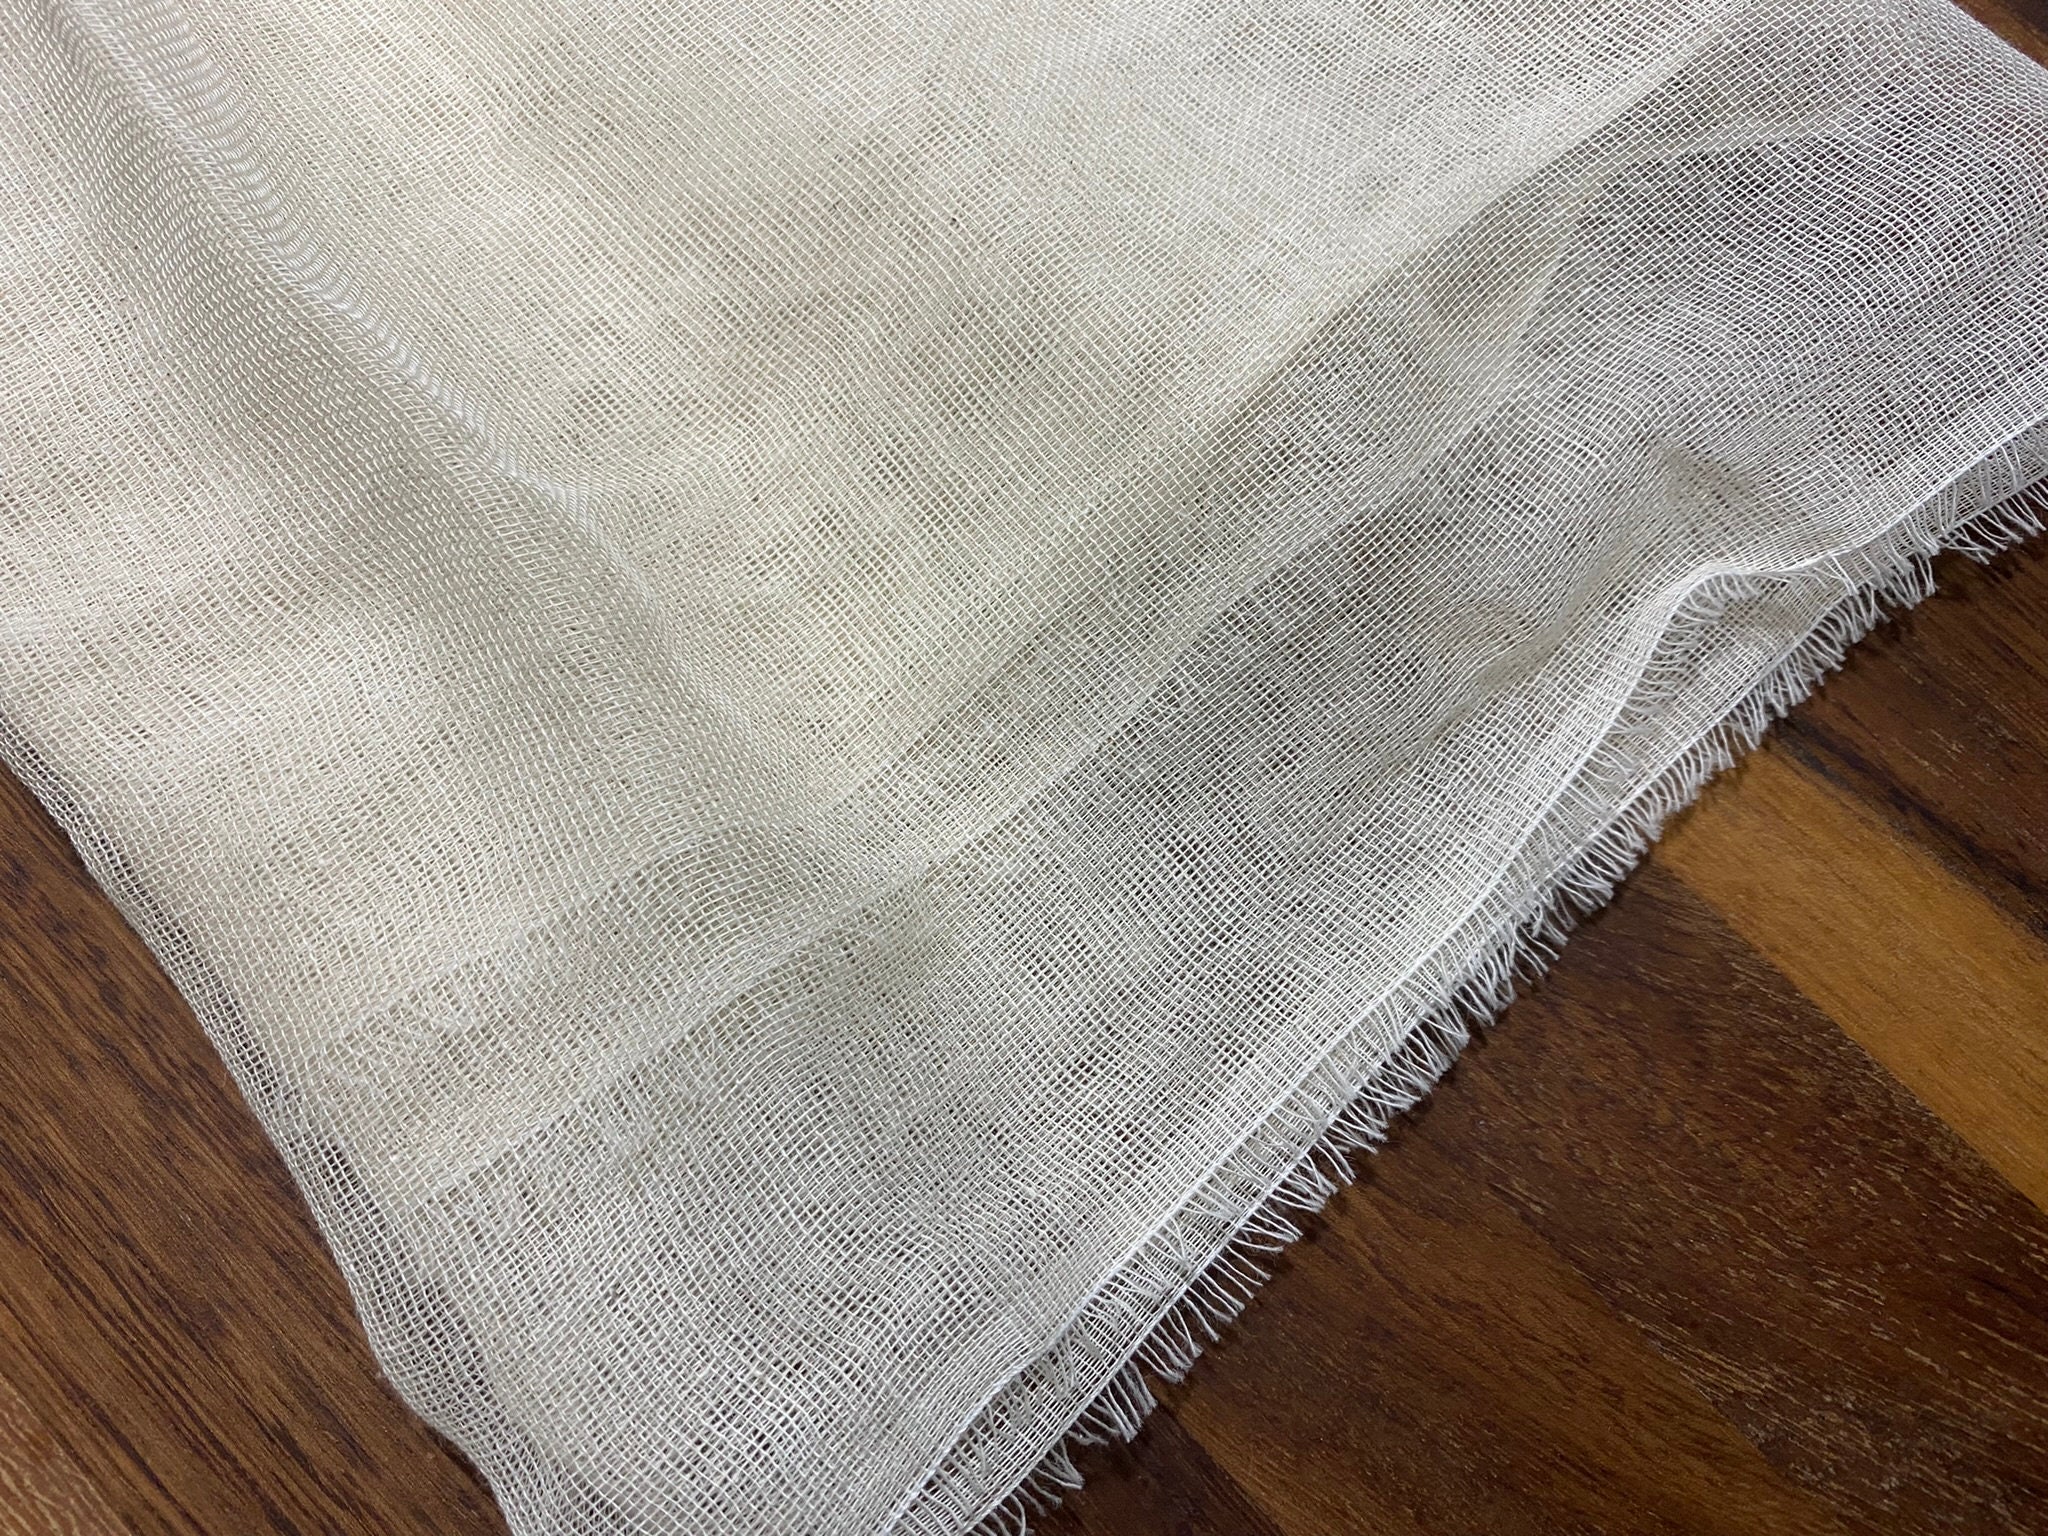 5m- Mull Muslin 100% Cotton Fabric Voile Curtains Fine Unbleached ...